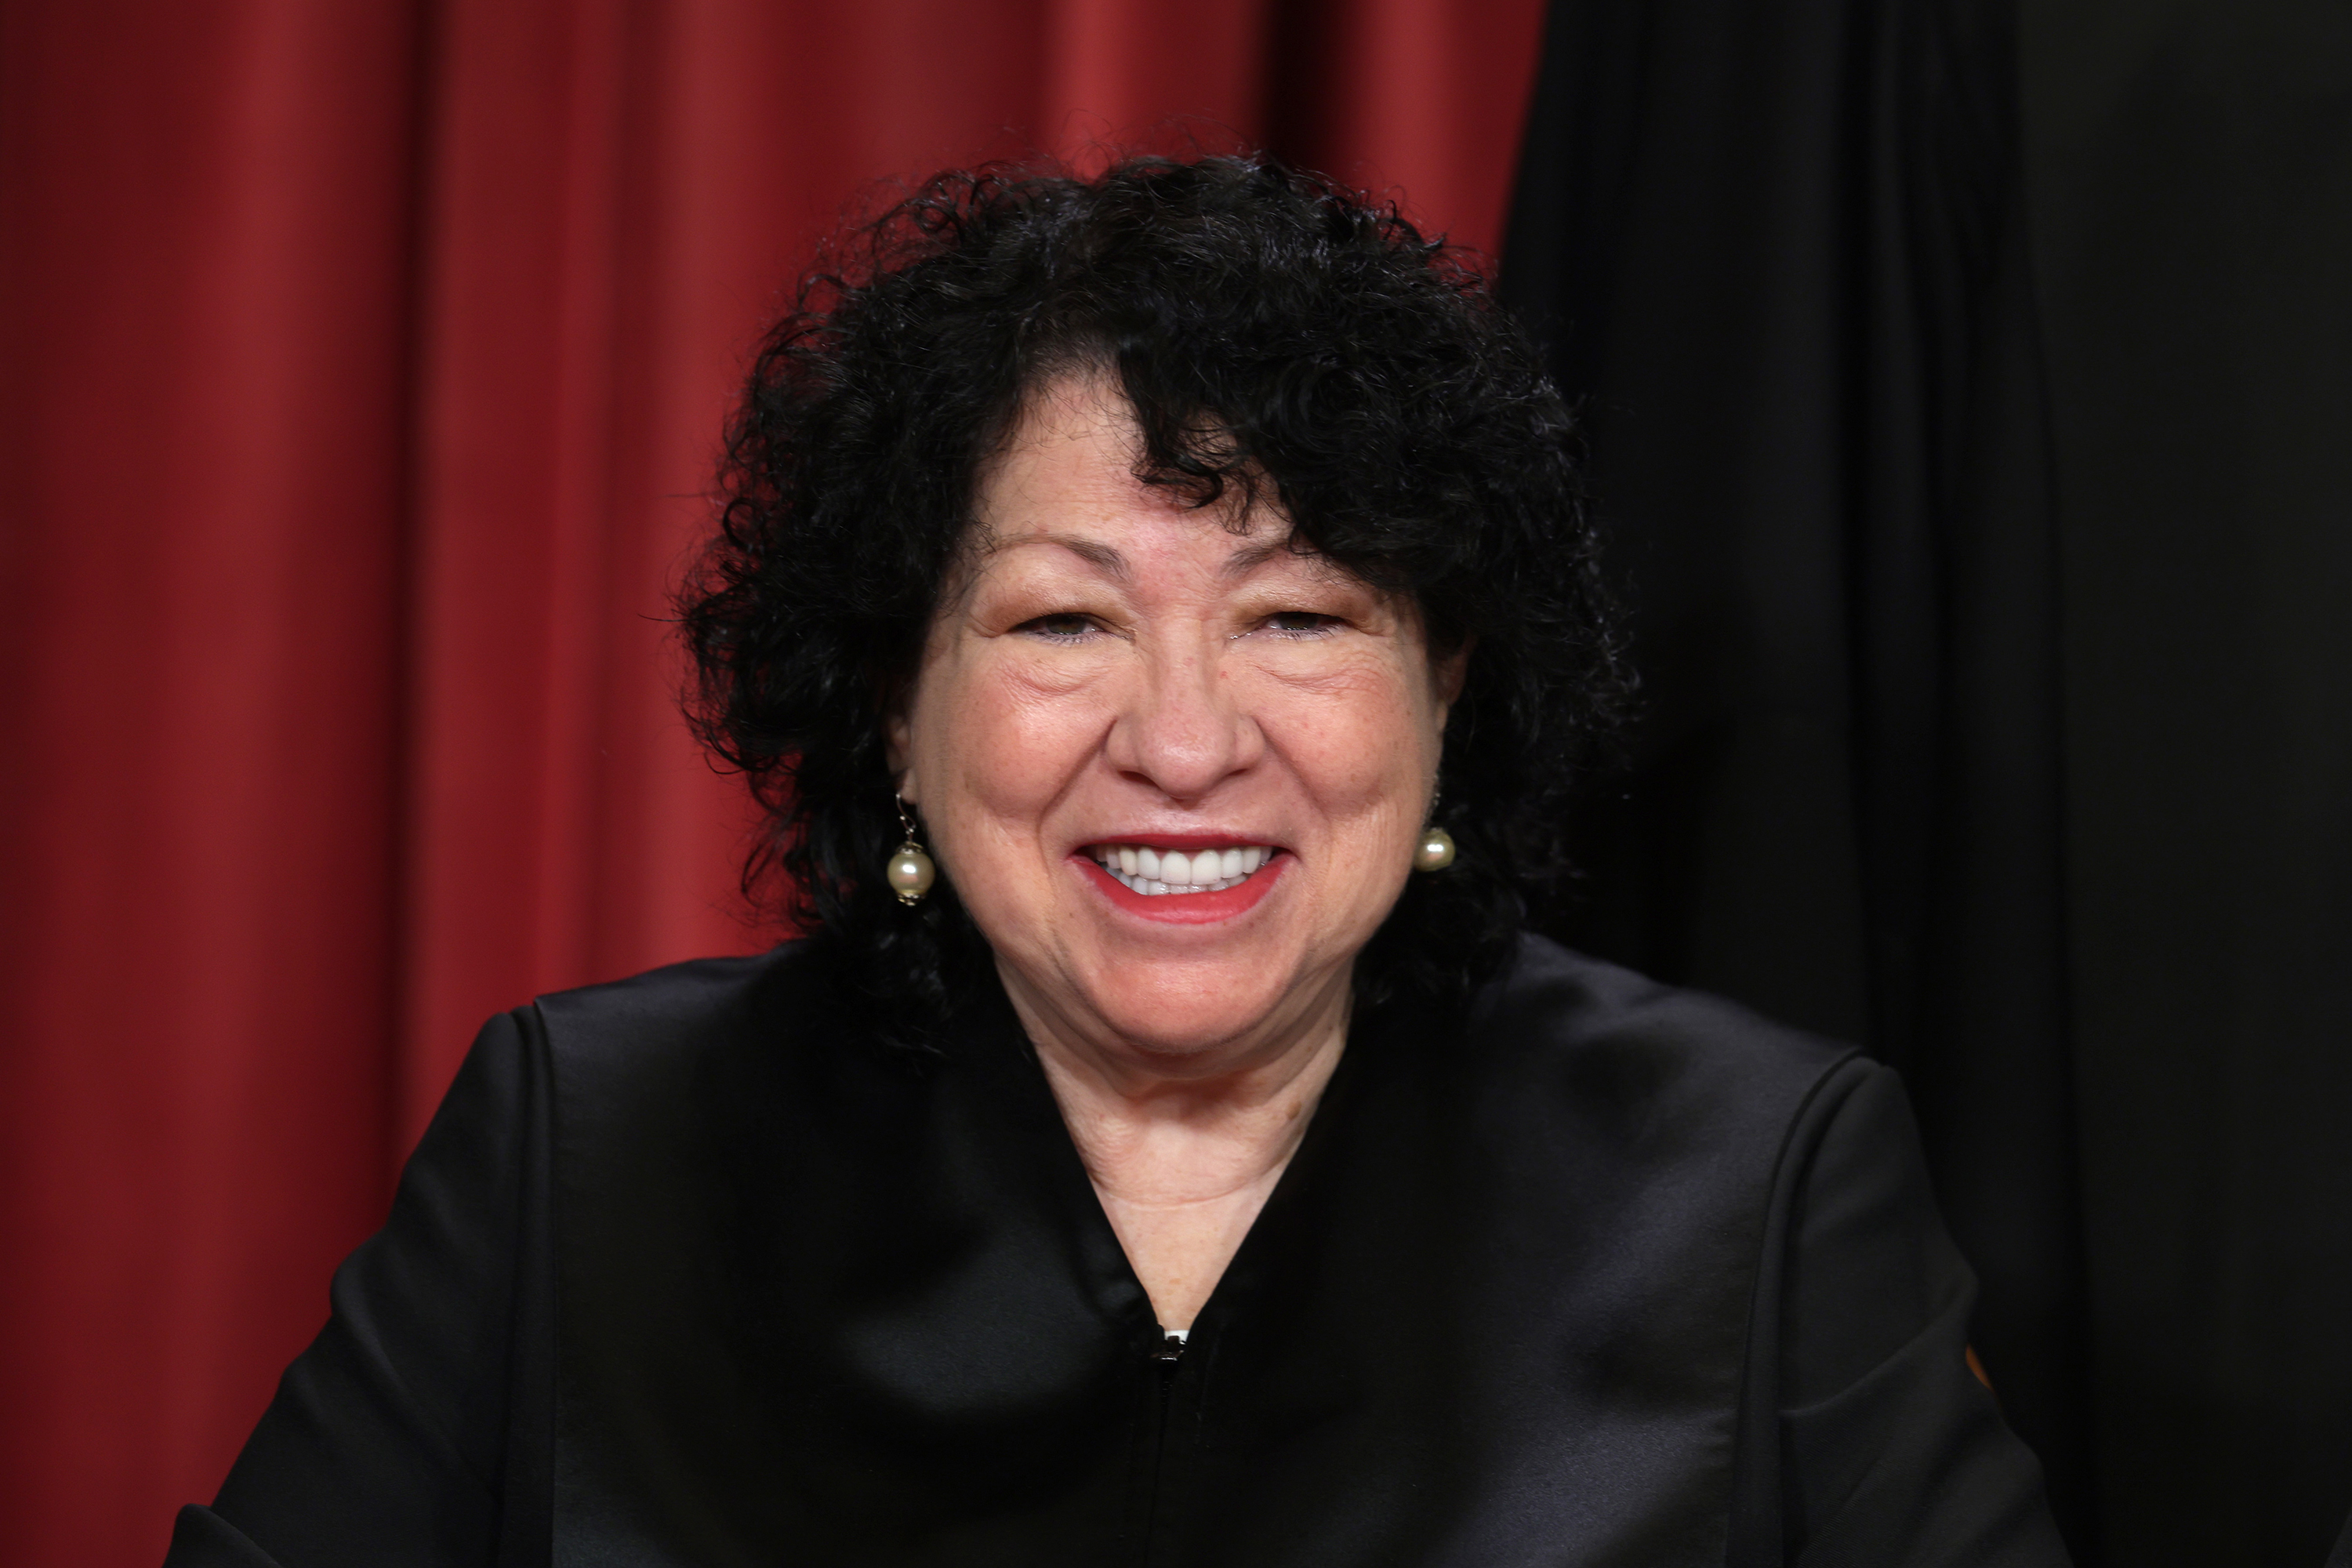 Justice Sonia Sotomayor poses for an official portrait at the Supreme Court in Washington, DC, in 2022.